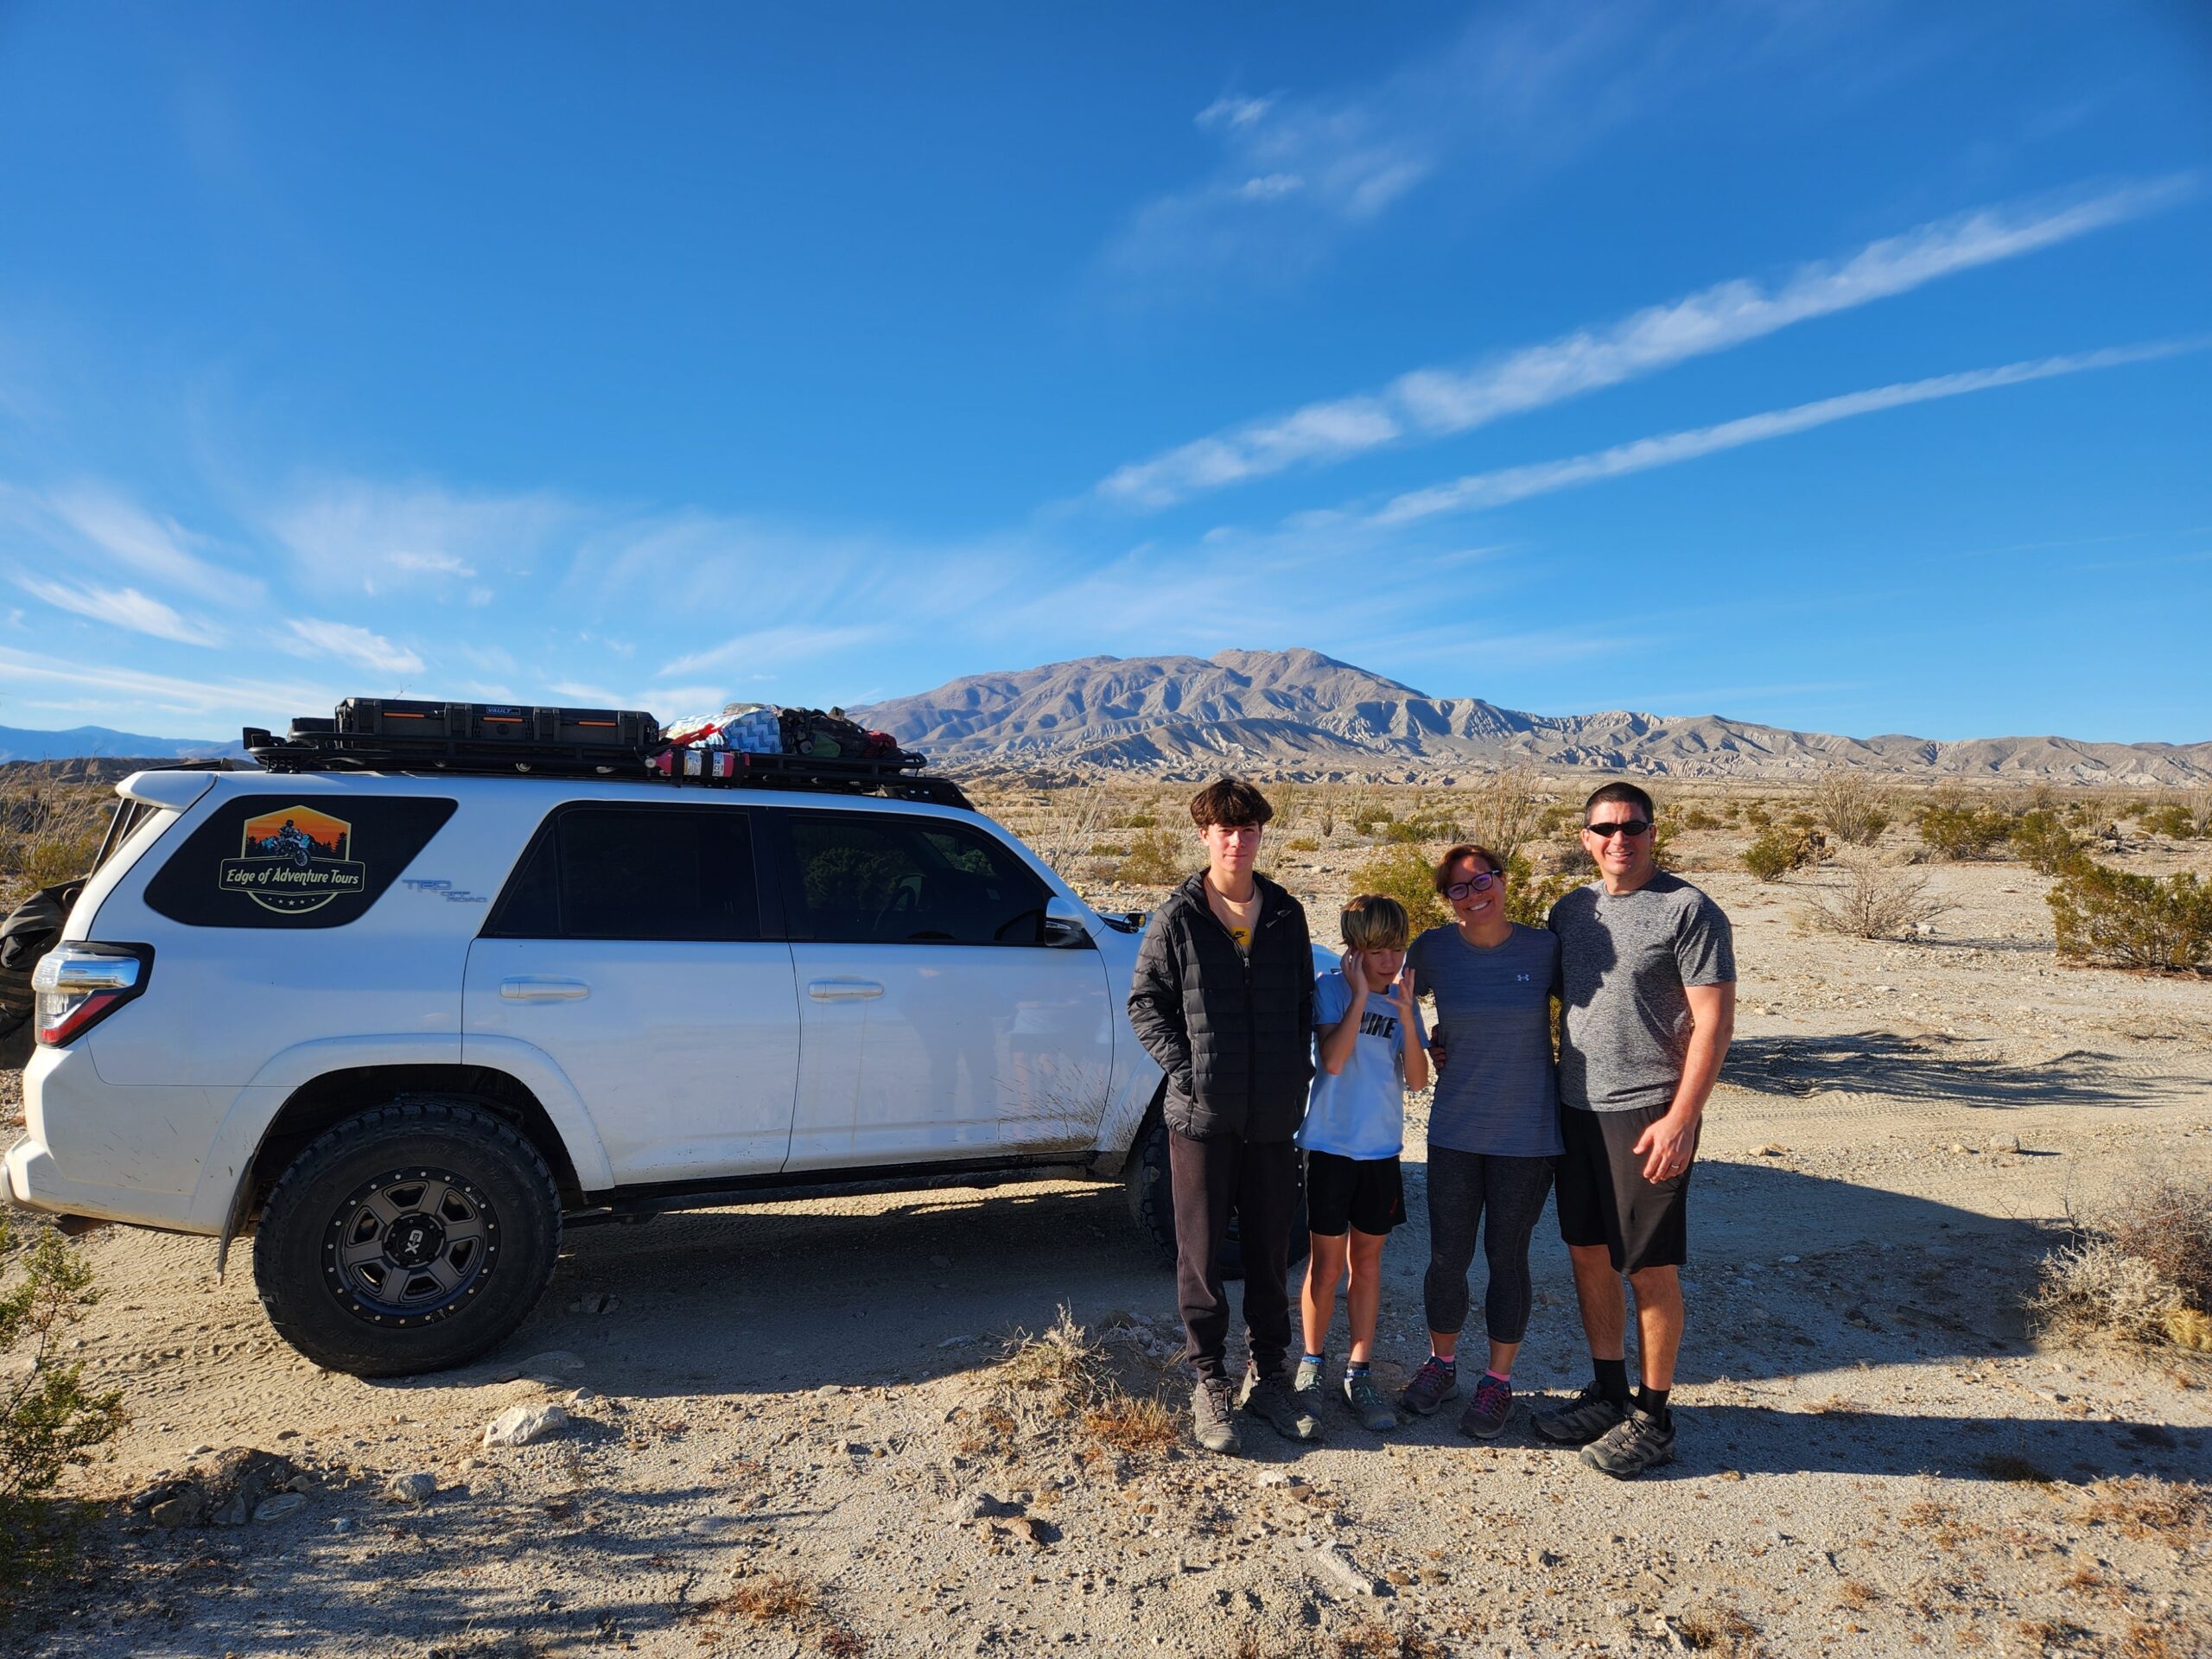 Family stands in front of a lifted Toyota 4runner in Anza Borrego Desert State Park